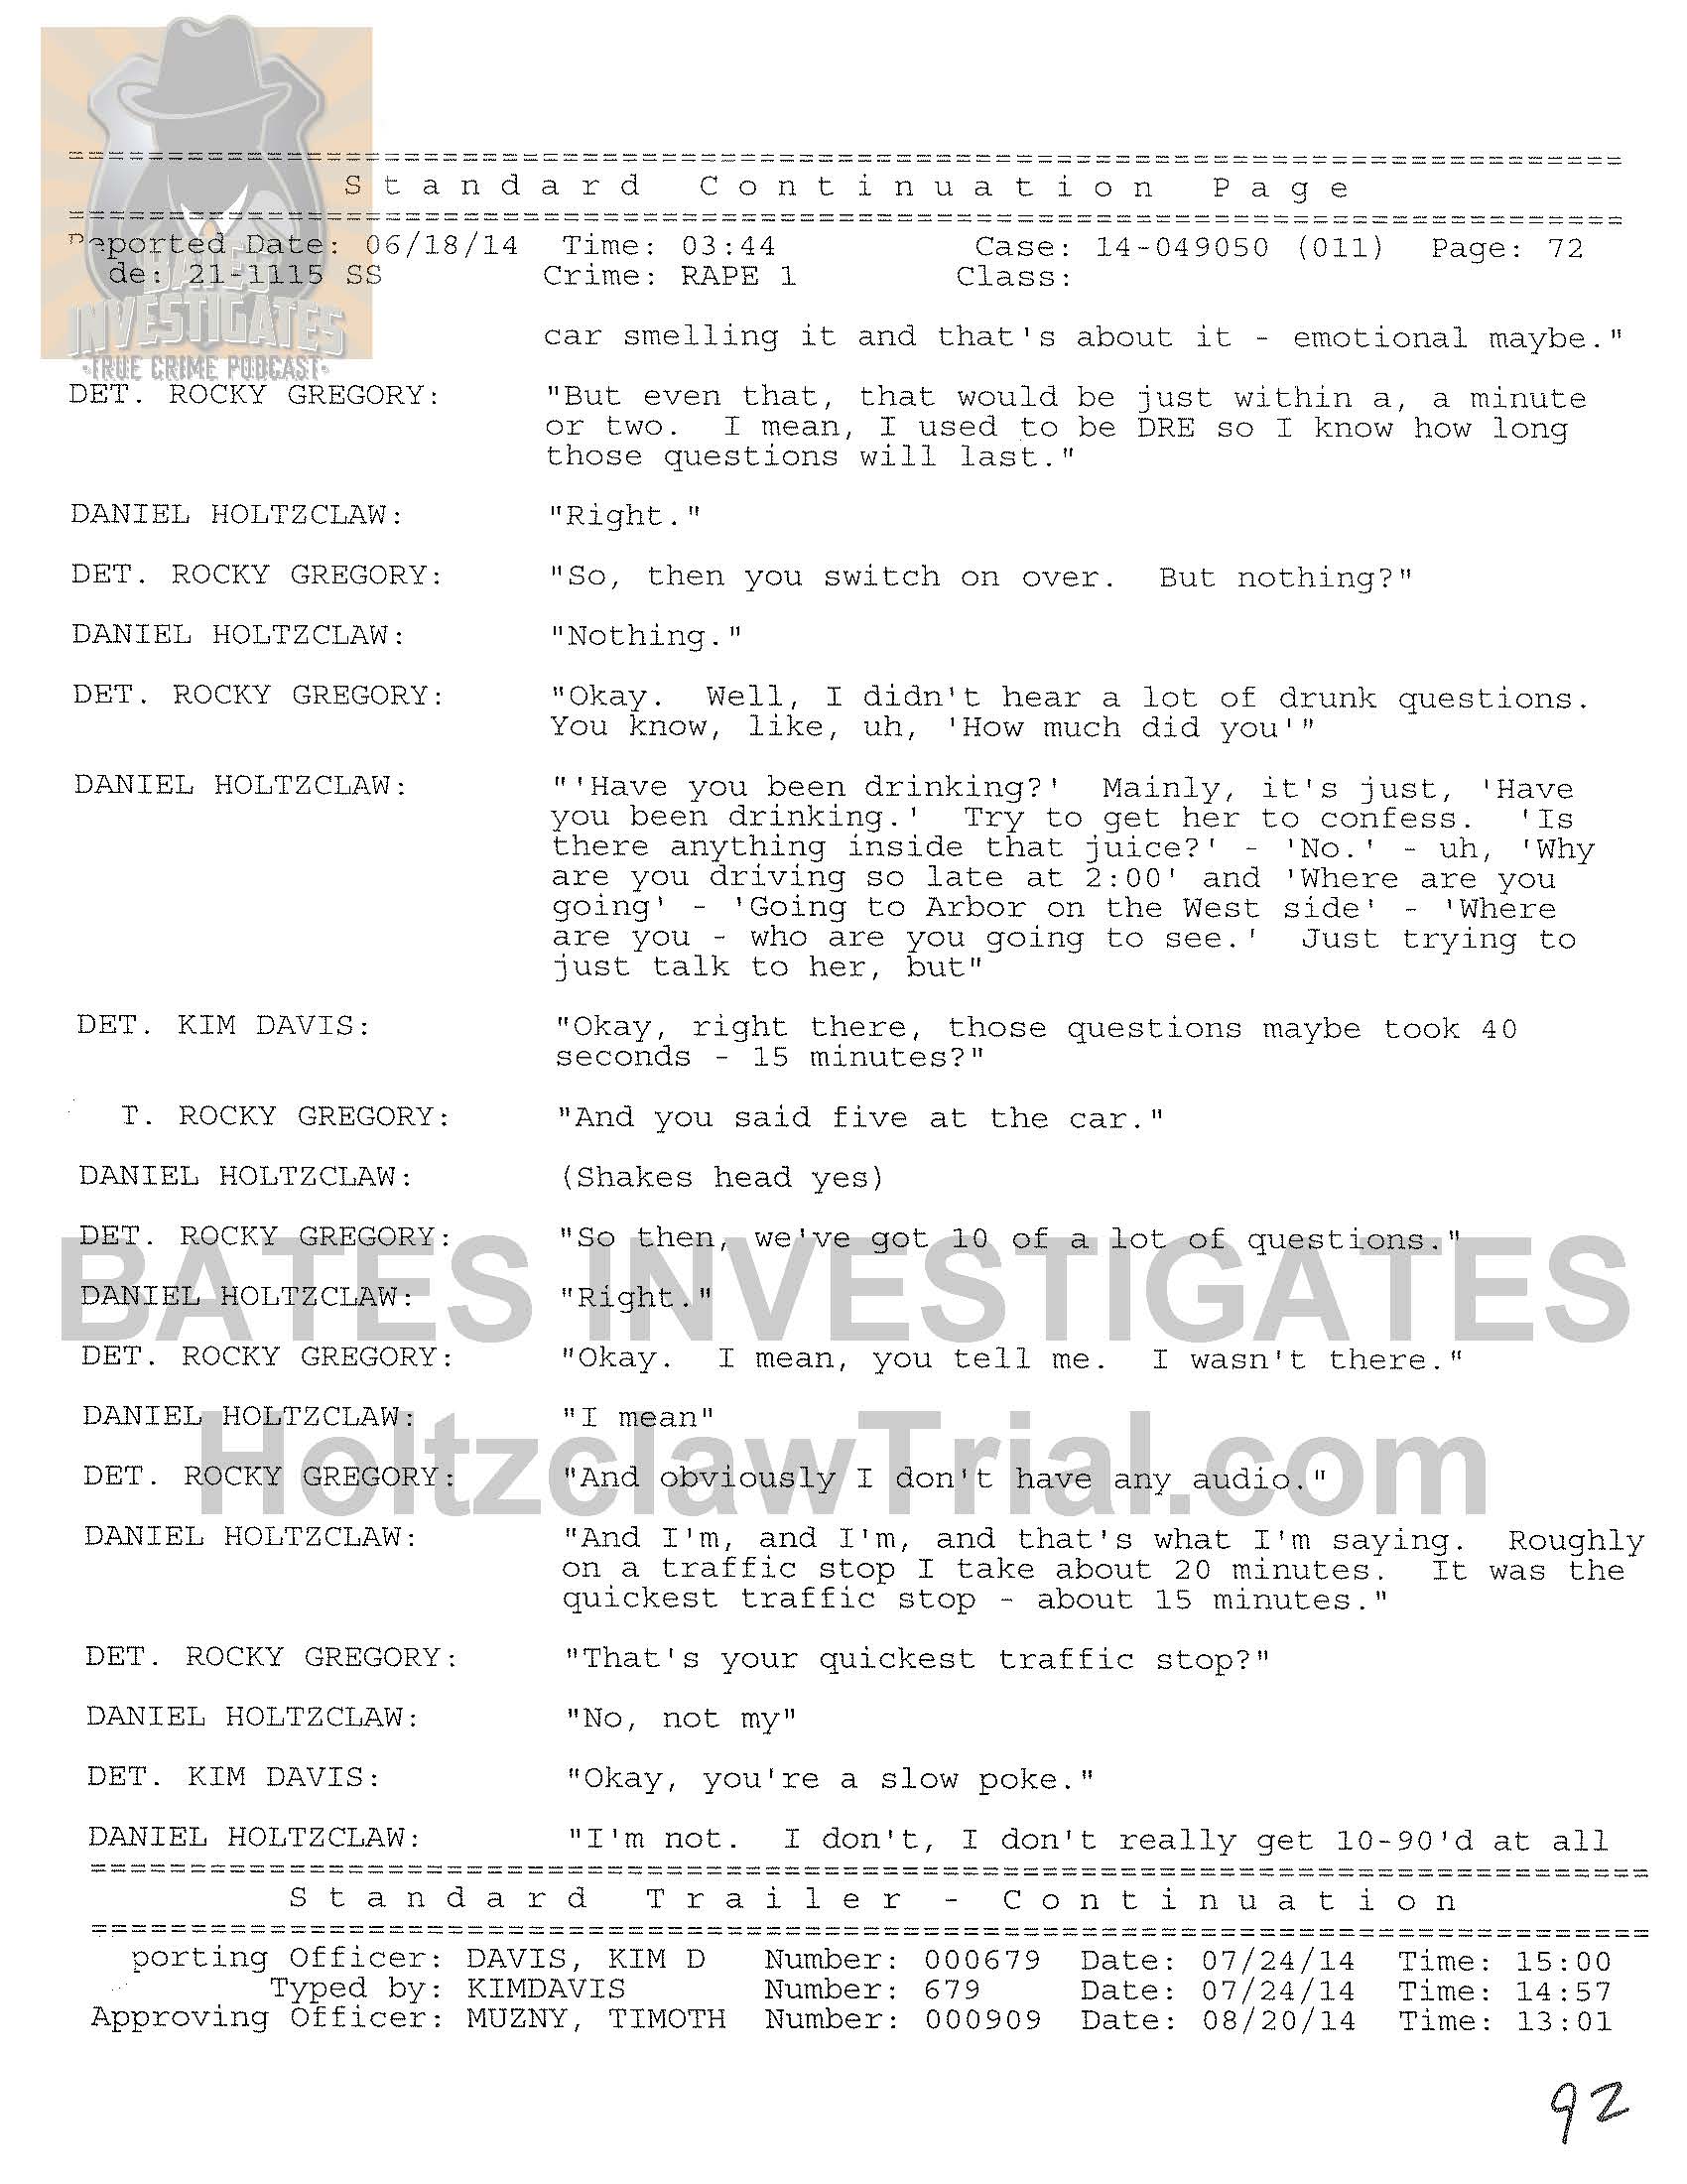 Holtzclaw Interrogation Transcript - Ep02 Redacted_Page_72.jpg